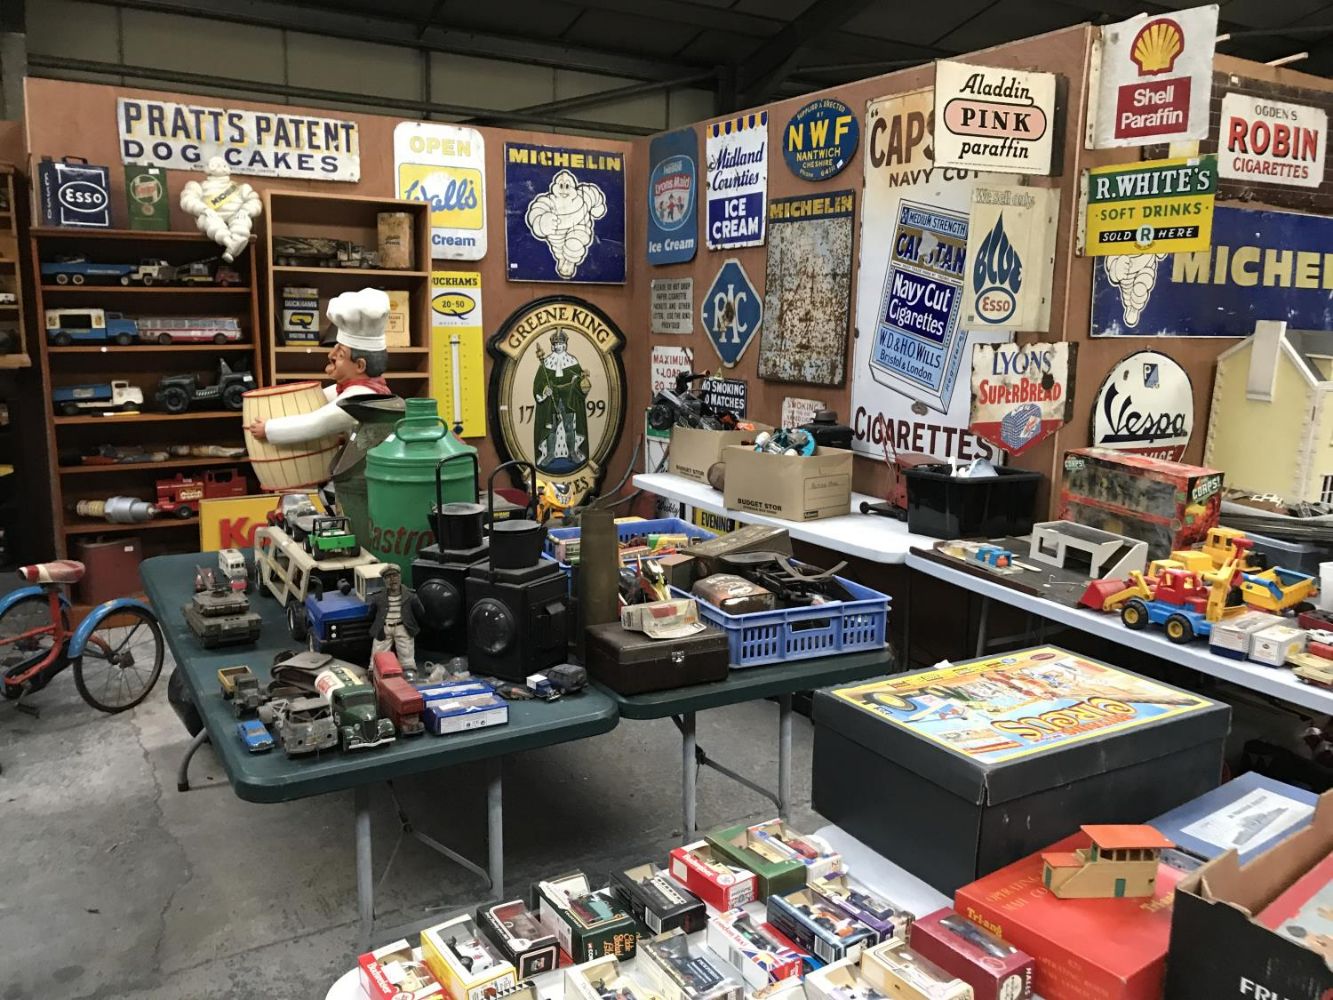 TWO DAY AUCTION OF COLLECTABLES, ANTIQUES, JEWELLERY, FURNITURE, VINTAGE ITEMS, TOOLS ETC. INCLUDING A SPECIAL SALE OF WINES AND SPIRITS